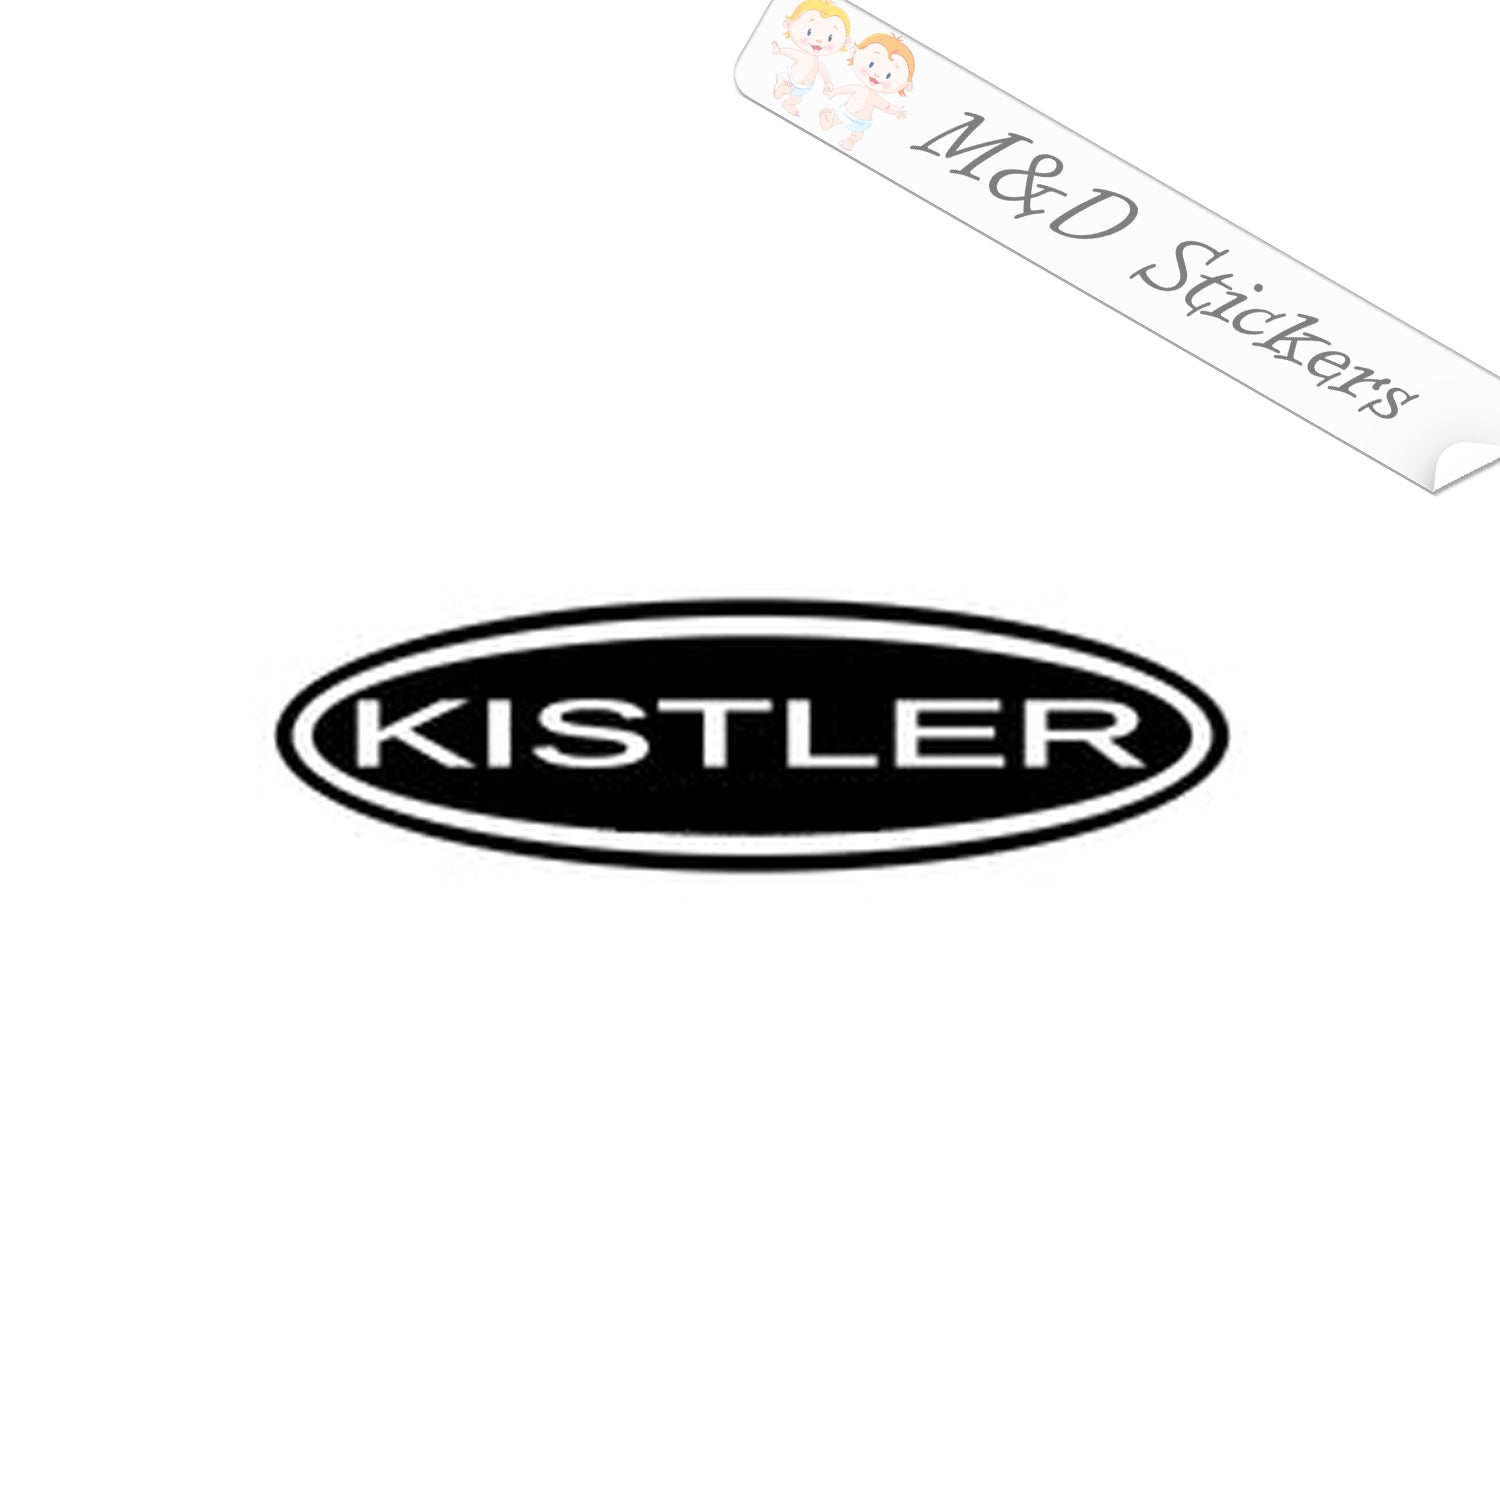 Kistler Fishing Rods (4.5 - 30) Vinyl Decal in Different colors & si –  M&D Stickers